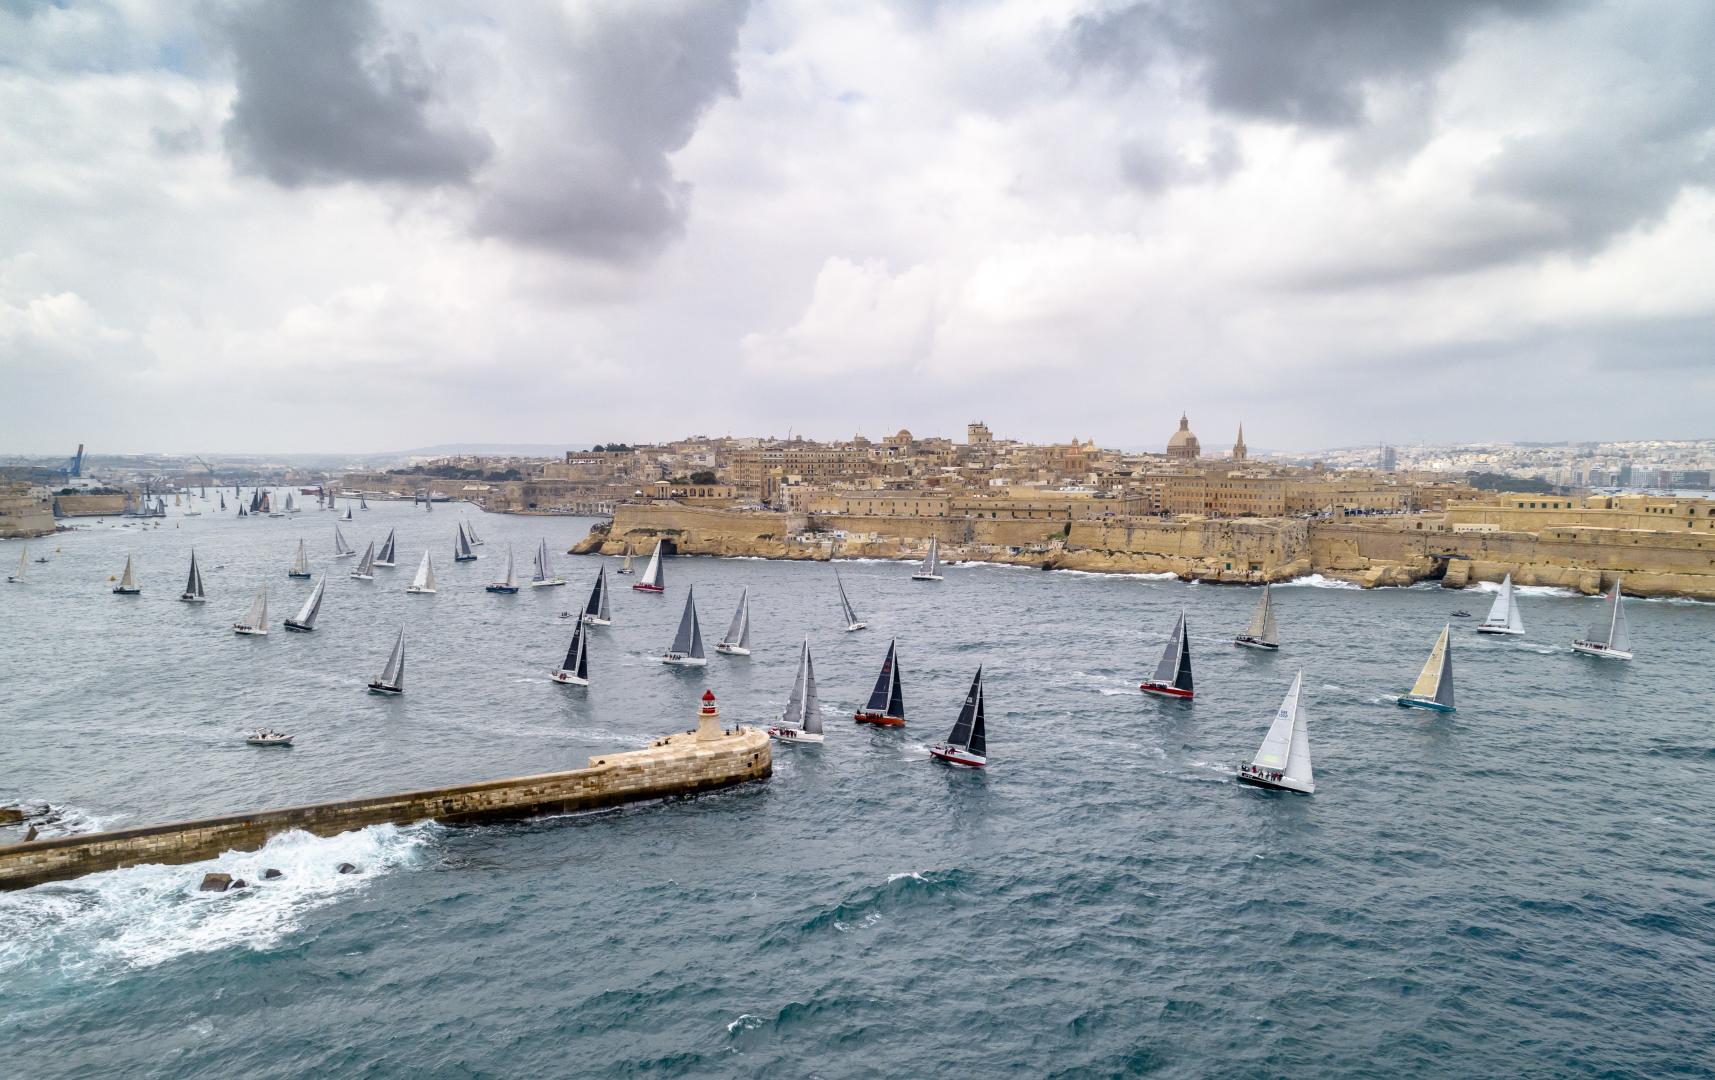 Rolex Middle Sea Race: Cautiously Moving Forward with Arrangements